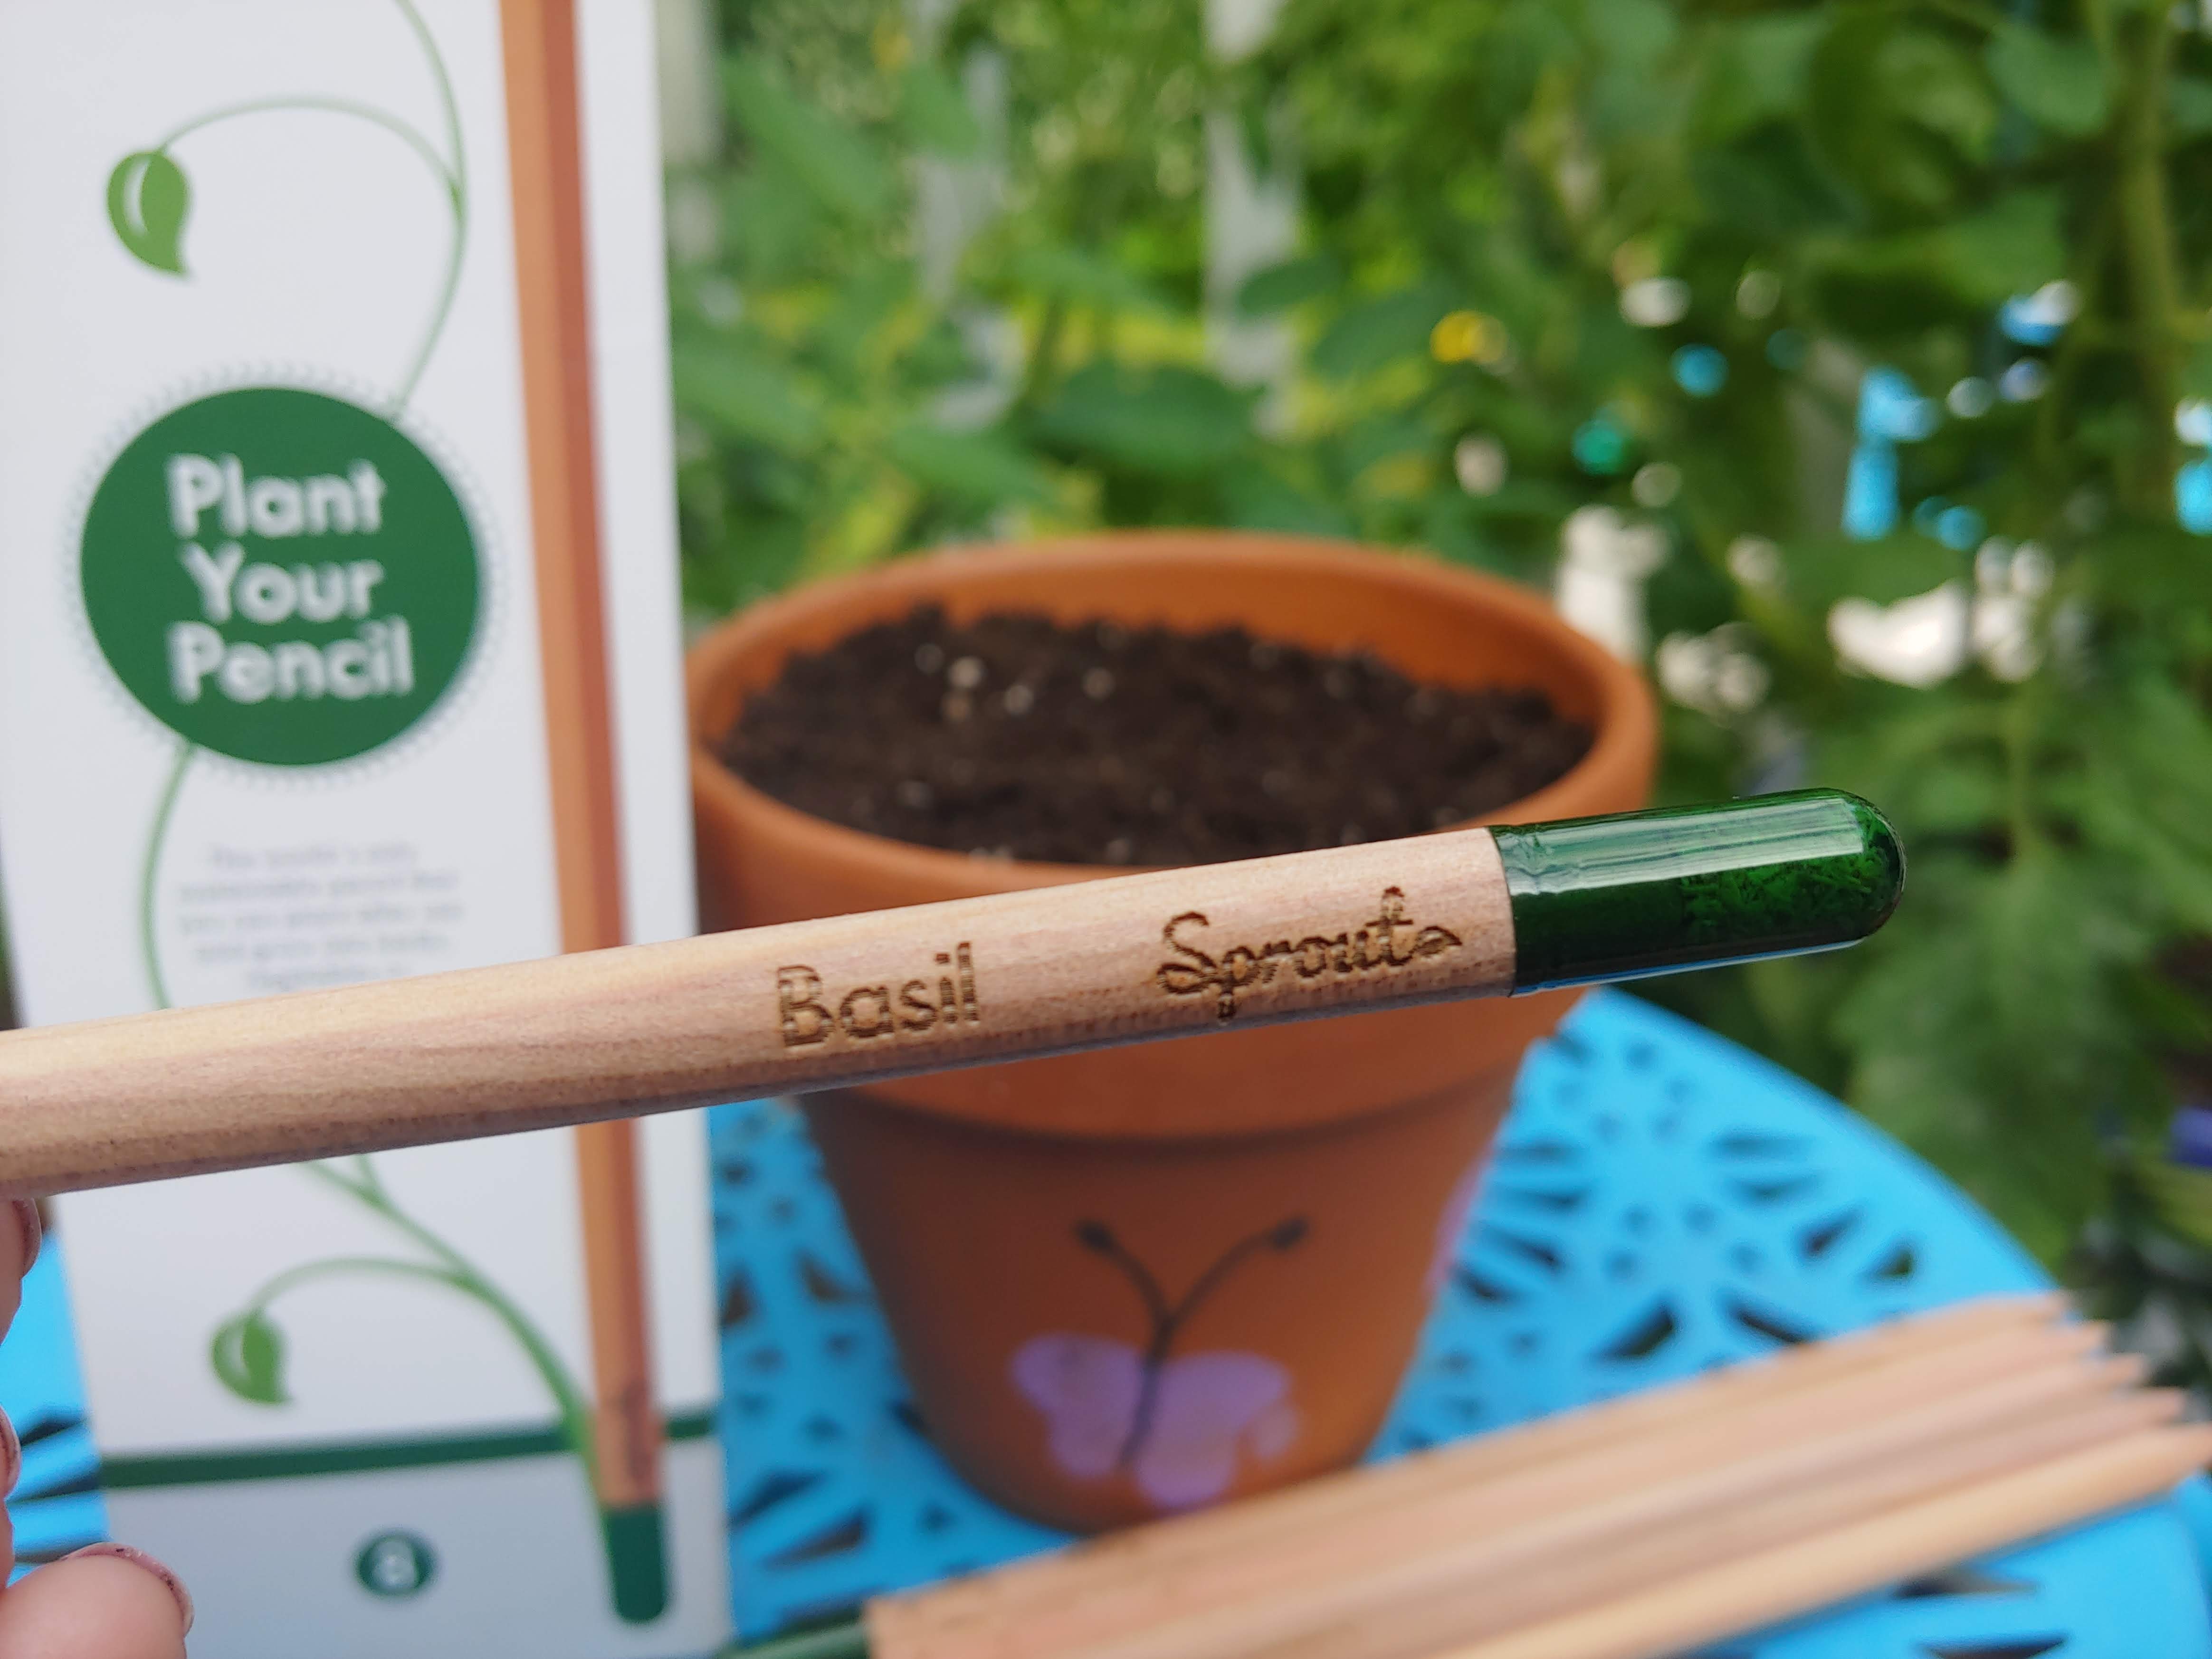 Pencil with a flower pot behind it and on a blue plant stand